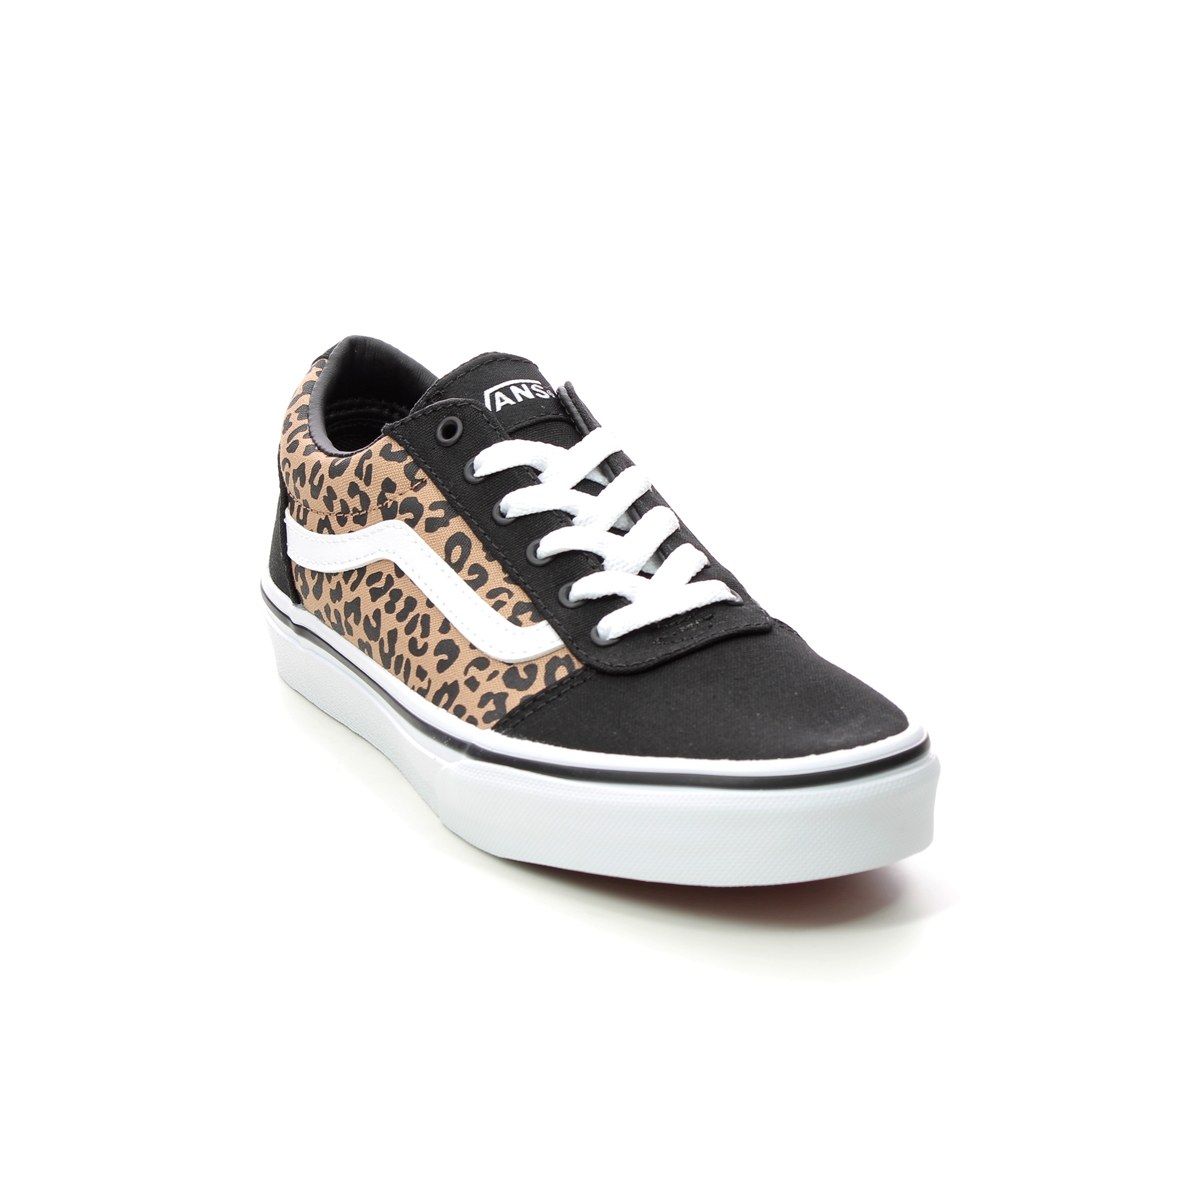 Vans Ward G Leopard print Kids girls trainers VN0A5KR7A-PX in a Plain Canvas in Size 3